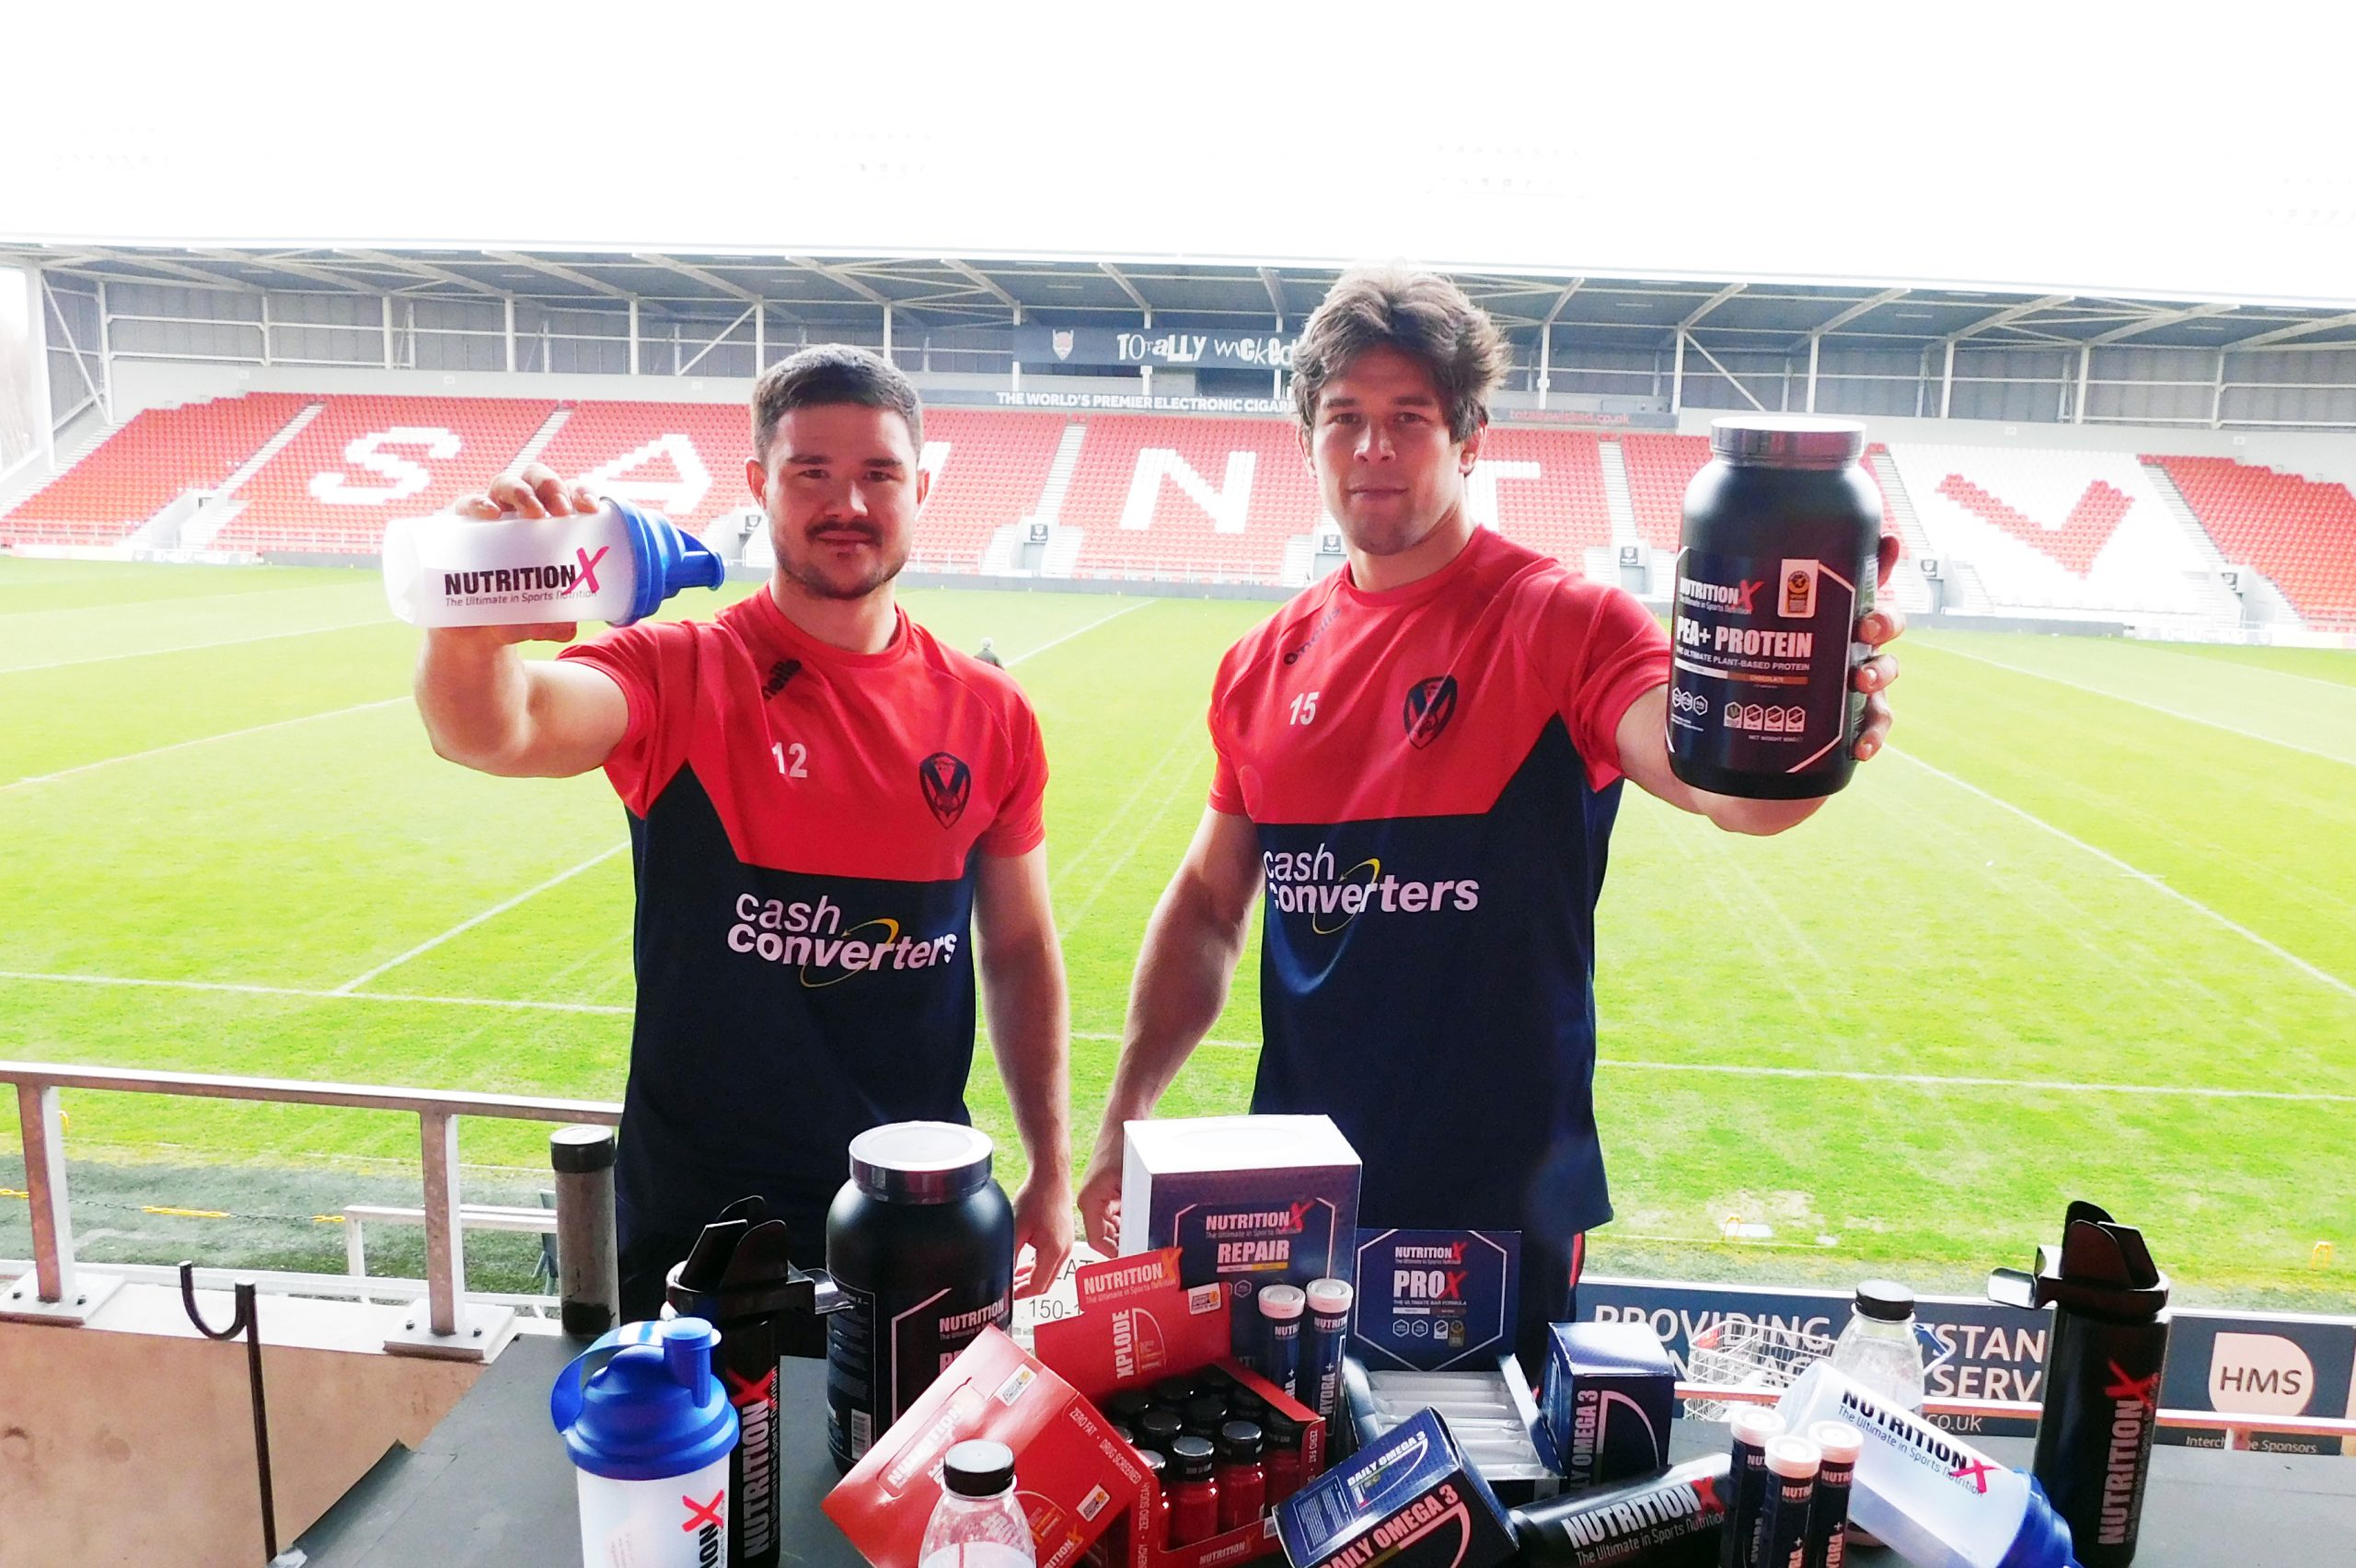 Nutrition X Joins Super League with St. Helens R.F.C Partnership